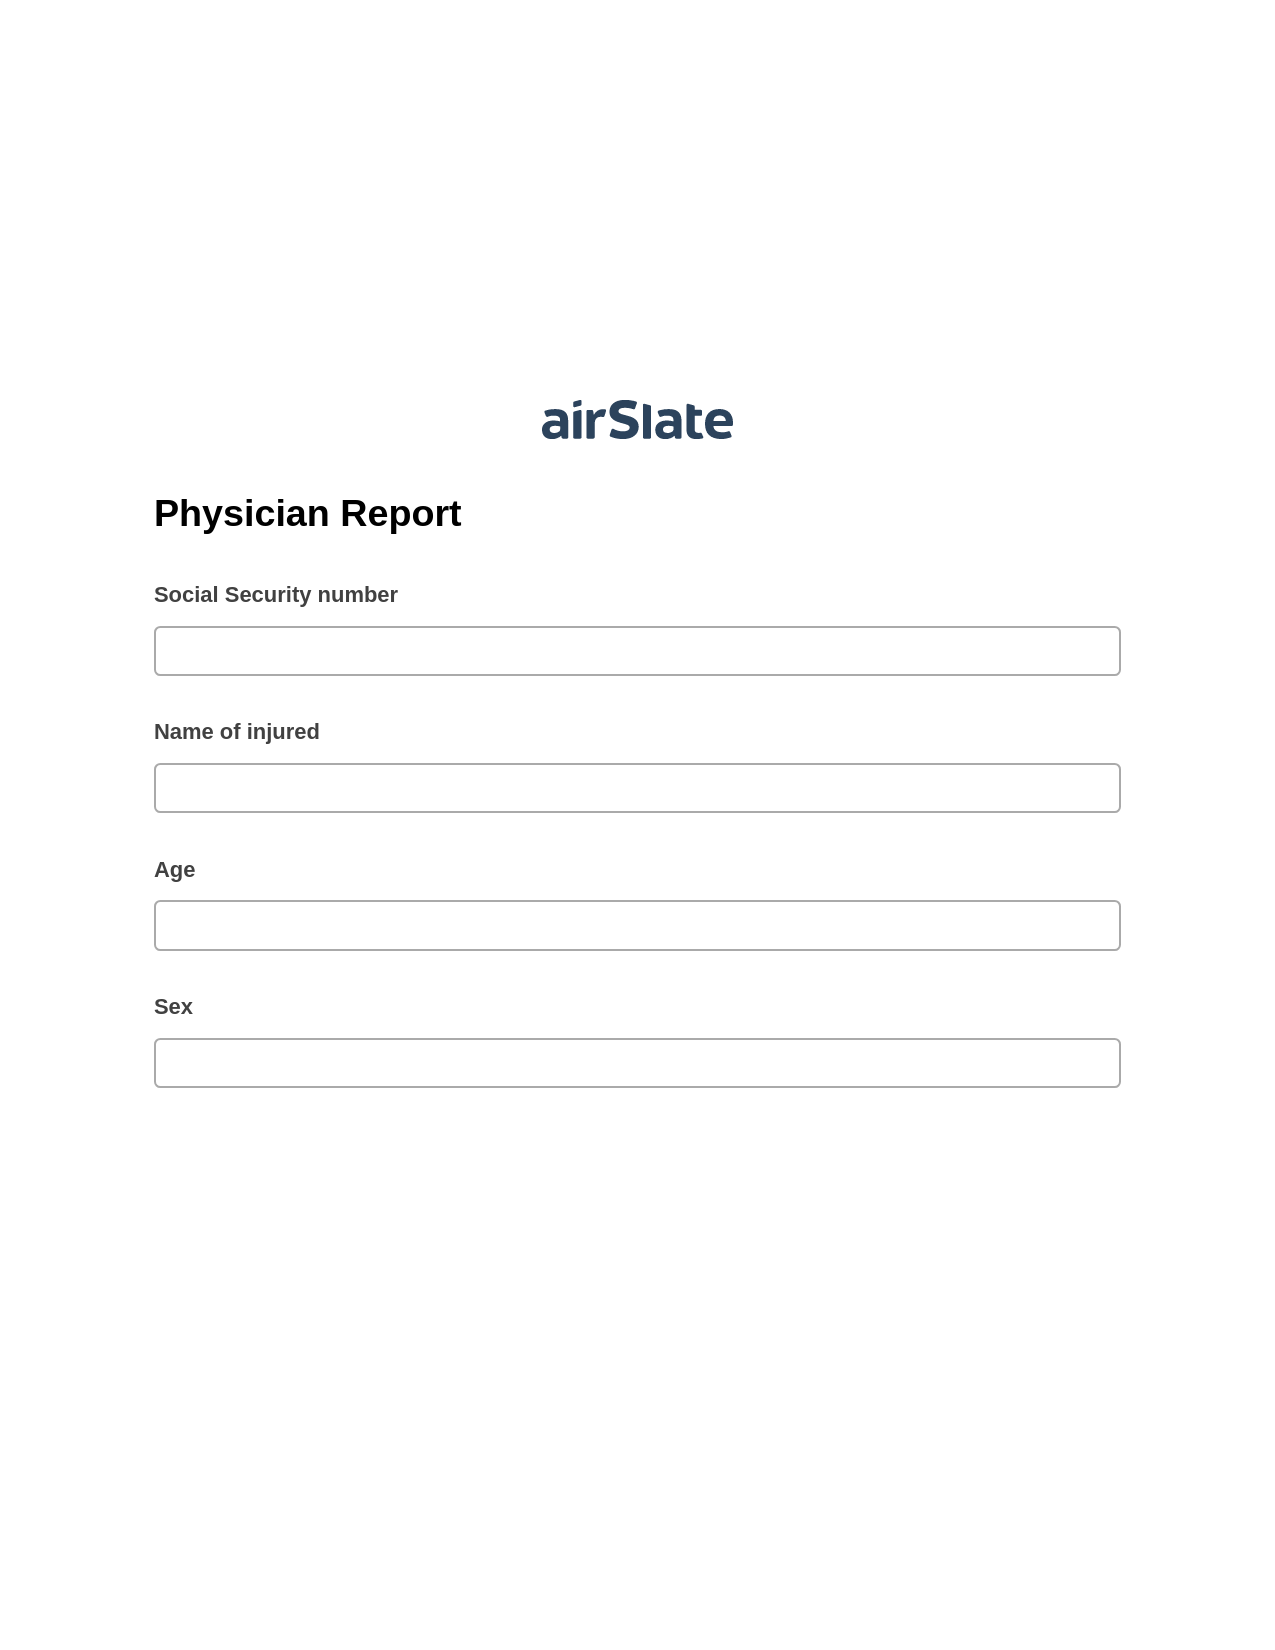 Multirole Physician Report Pre-fill from MS Dynamics 365 Records, Update NetSuite Record Bot, Export to Google Sheet Bot